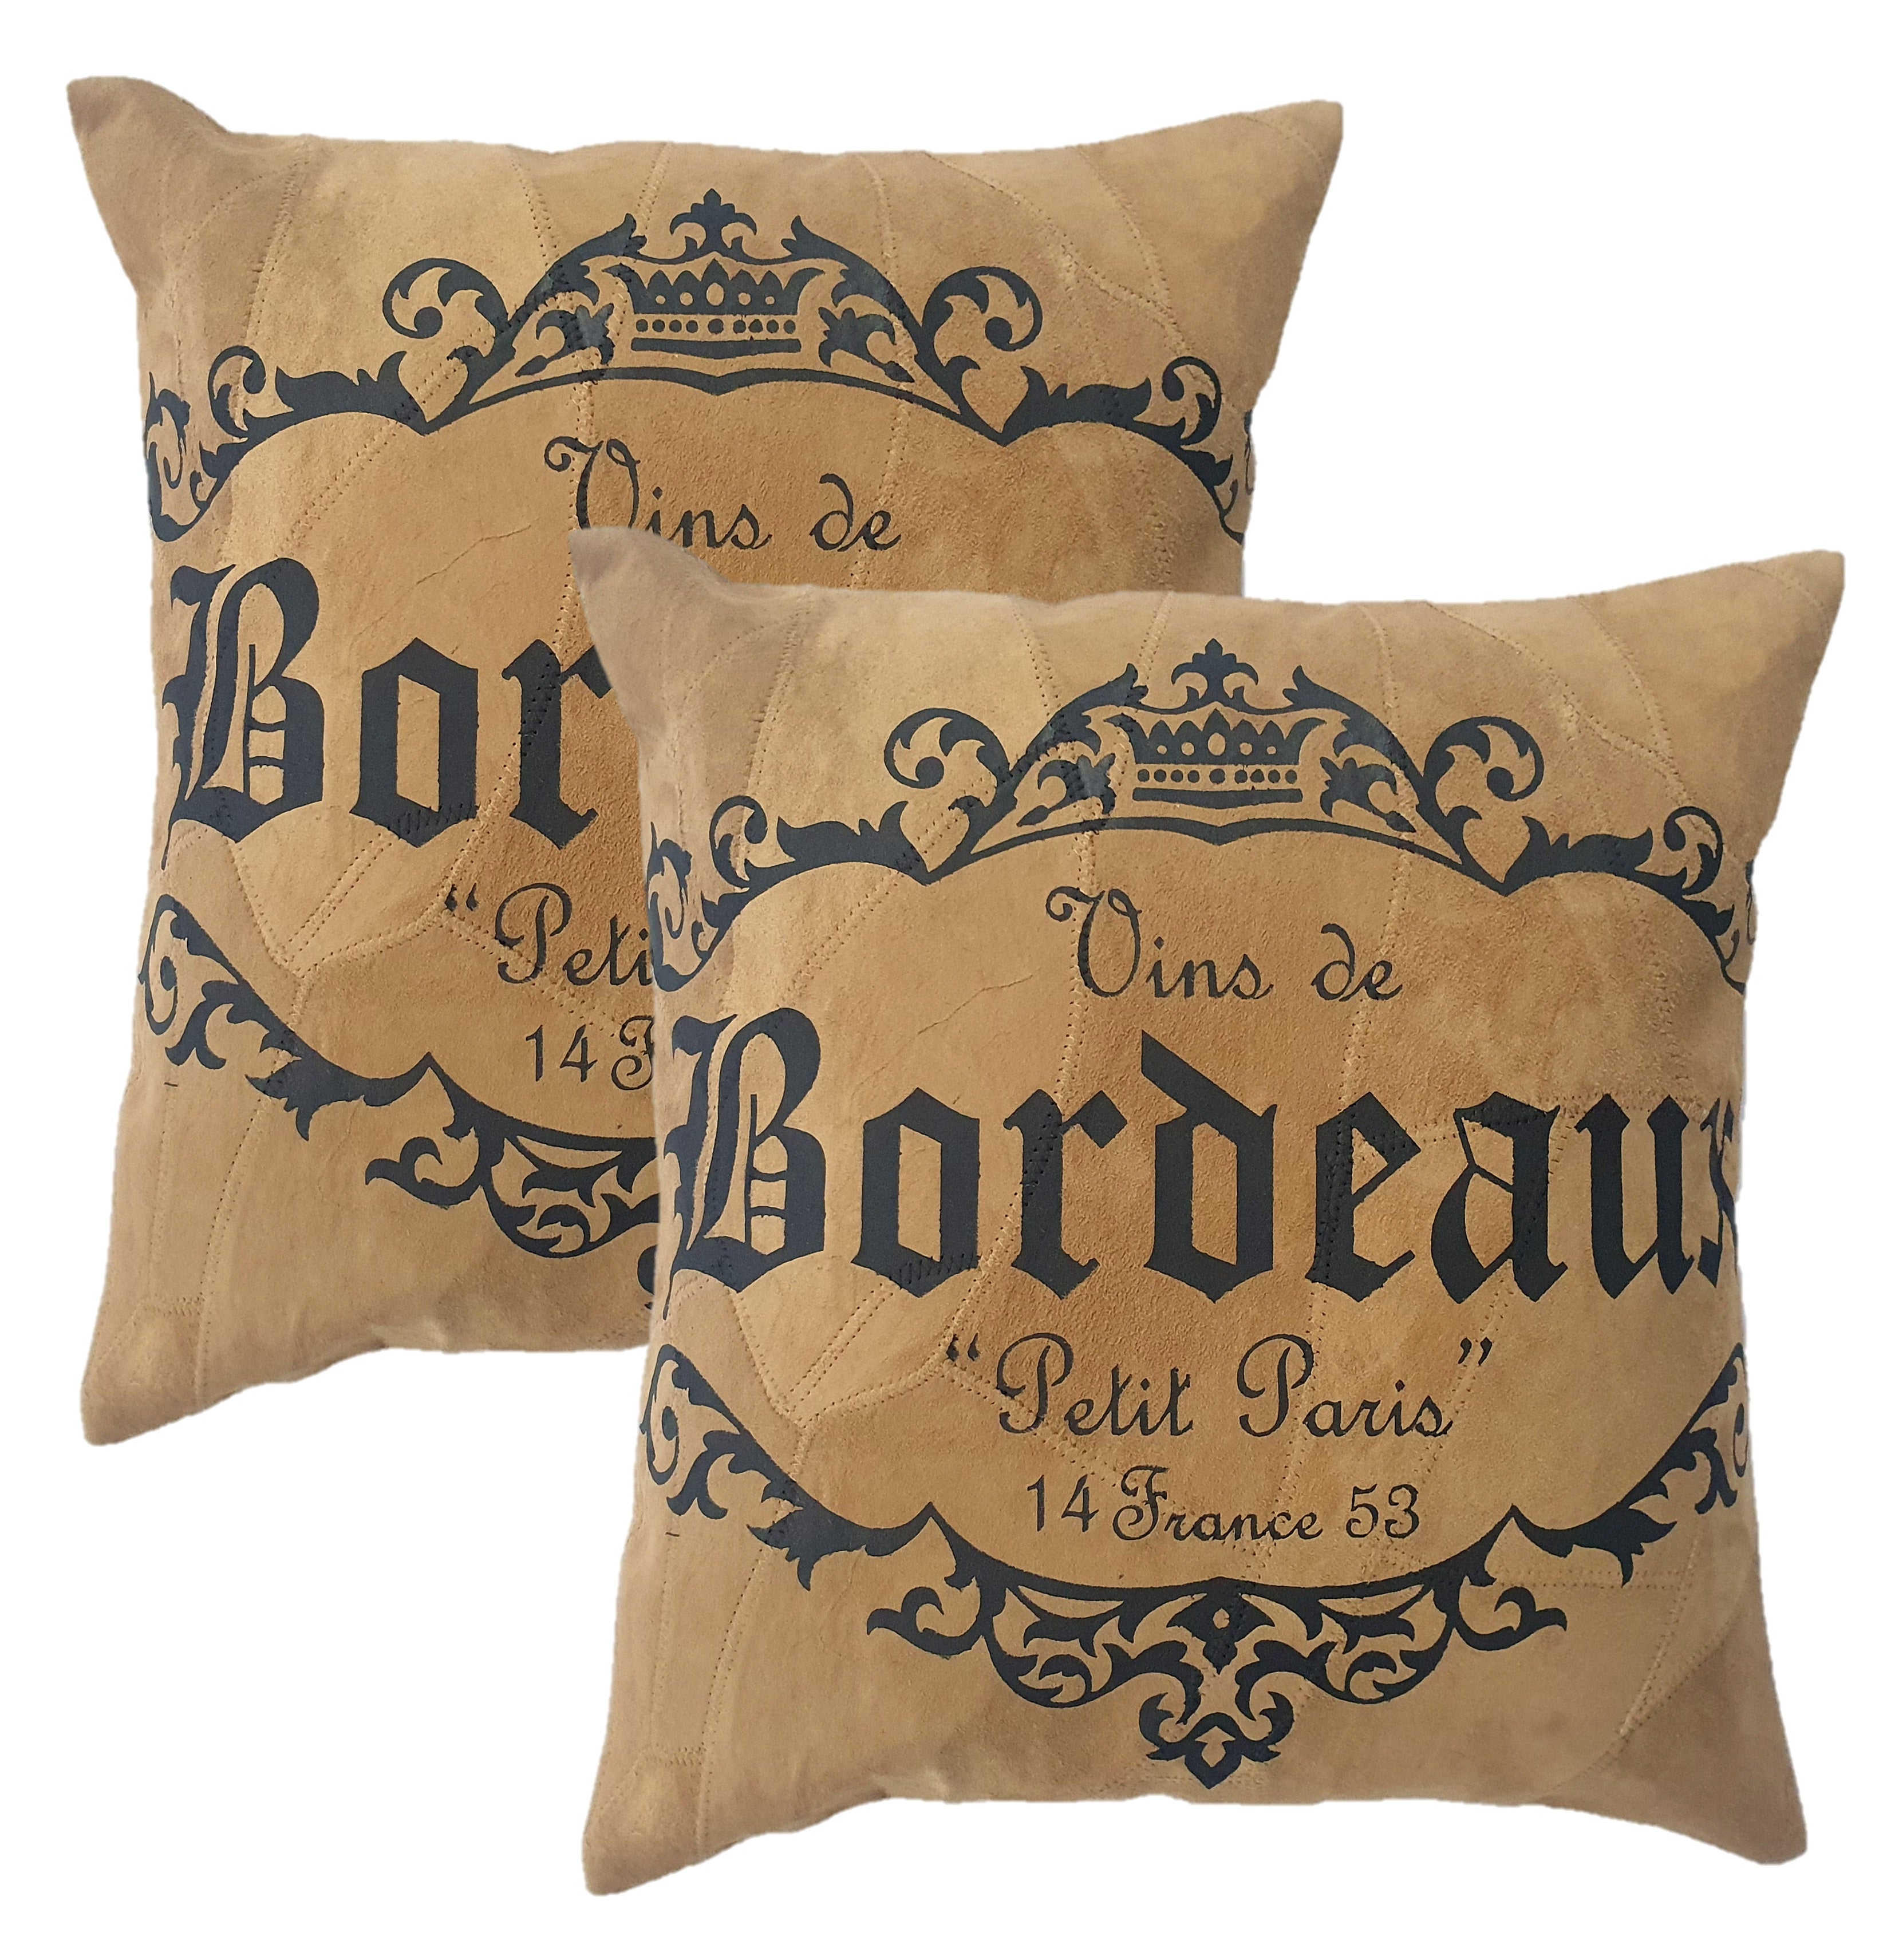 Bordeaux Square Cushion Covers without Filling - 16x16 Inch (Set of 2) | Book Bargain Buy